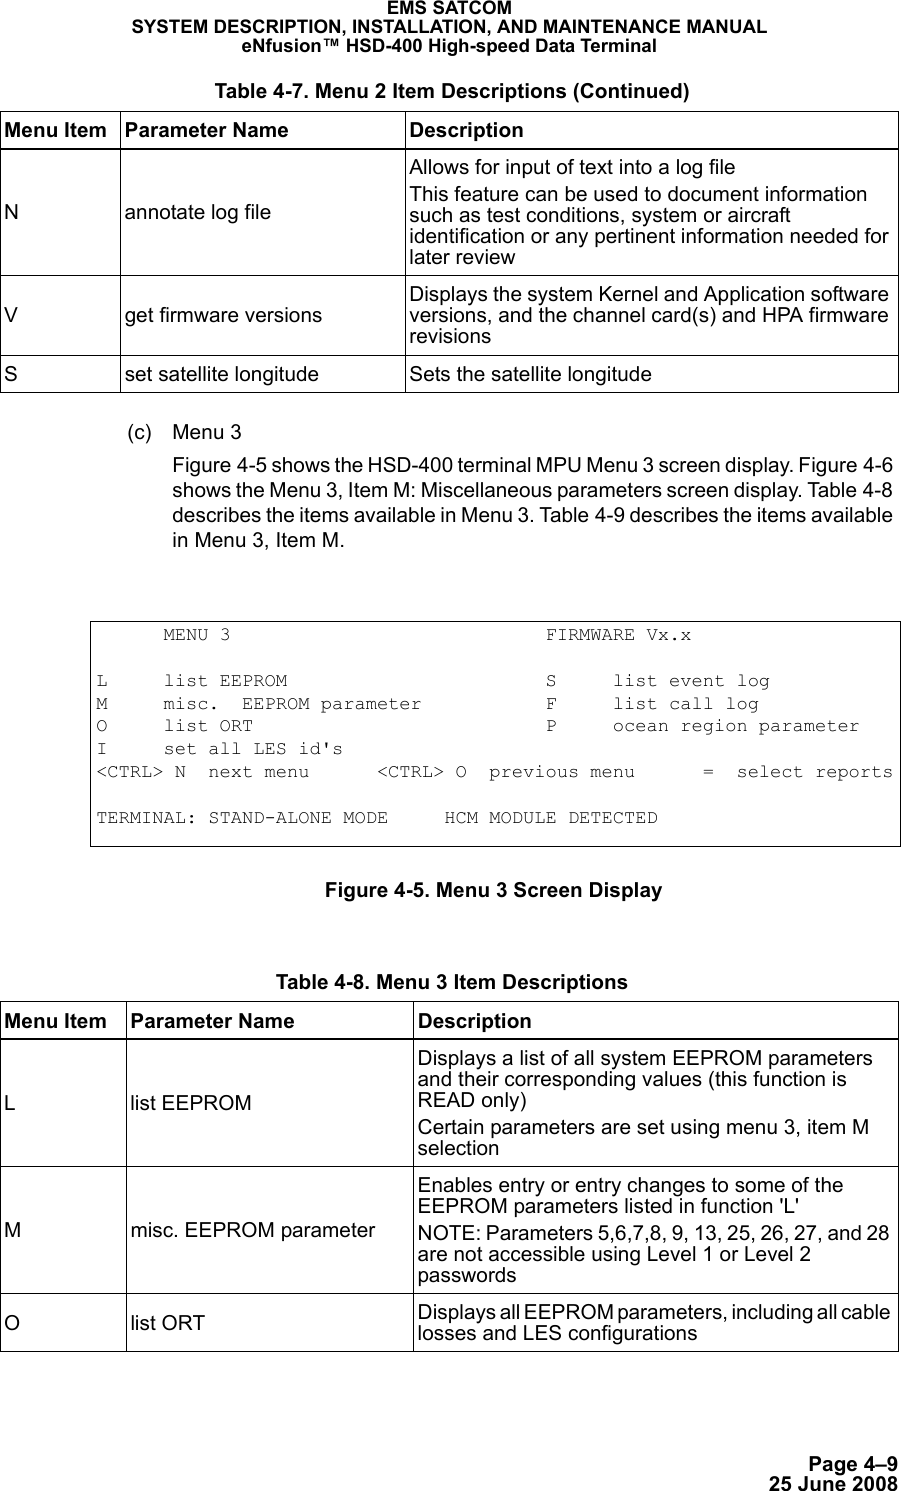 Page 4–925 June 2008EMS SATCOMSYSTEM DESCRIPTION, INSTALLATION, AND MAINTENANCE MANUALeNfusion™ HSD-400 High-speed Data Terminal(c) Menu 3Figure 4-5 shows the HSD-400 terminal MPU Menu 3 screen display. Figure 4-6 shows the Menu 3, Item M: Miscellaneous parameters screen display. Table 4-8 describes the items available in Menu 3. Tab le 4-9 describes the items available in Menu 3, Item M.Figure 4-5. Menu 3 Screen DisplayN annotate log fileAllows for input of text into a log fileThis feature can be used to document information such as test conditions, system or aircraft identification or any pertinent information needed for later reviewV get firmware versionsDisplays the system Kernel and Application software versions, and the channel card(s) and HPA firmware revisionsS set satellite longitude Sets the satellite longitude Table 4-7. Menu 2 Item Descriptions (Continued)Menu Item Parameter Name Description      MENU 3                            FIRMWARE Vx.xL     list EEPROM                       S     list event logM     misc.  EEPROM parameter           F     list call logO     list ORT                          P     ocean region parameterI     set all LES id&apos;s&lt;CTRL&gt; N  next menu      &lt;CTRL&gt; O  previous menu      =  select reportsTERMINAL: STAND-ALONE MODE     HCM MODULE DETECTED Table 4-8. Menu 3 Item Descriptions Menu Item Parameter Name DescriptionL list EEPROMDisplays a list of all system EEPROM parameters and their corresponding values (this function is READ only)Certain parameters are set using menu 3, item M selectionM misc. EEPROM parameterEnables entry or entry changes to some of the EEPROM parameters listed in function &apos;L&apos;NOTE: Parameters 5,6,7,8, 9, 13, 25, 26, 27, and 28 are not accessible using Level 1 or Level 2 passwords Olist ORT Displays all EEPROM parameters, including all cable losses and LES configurations